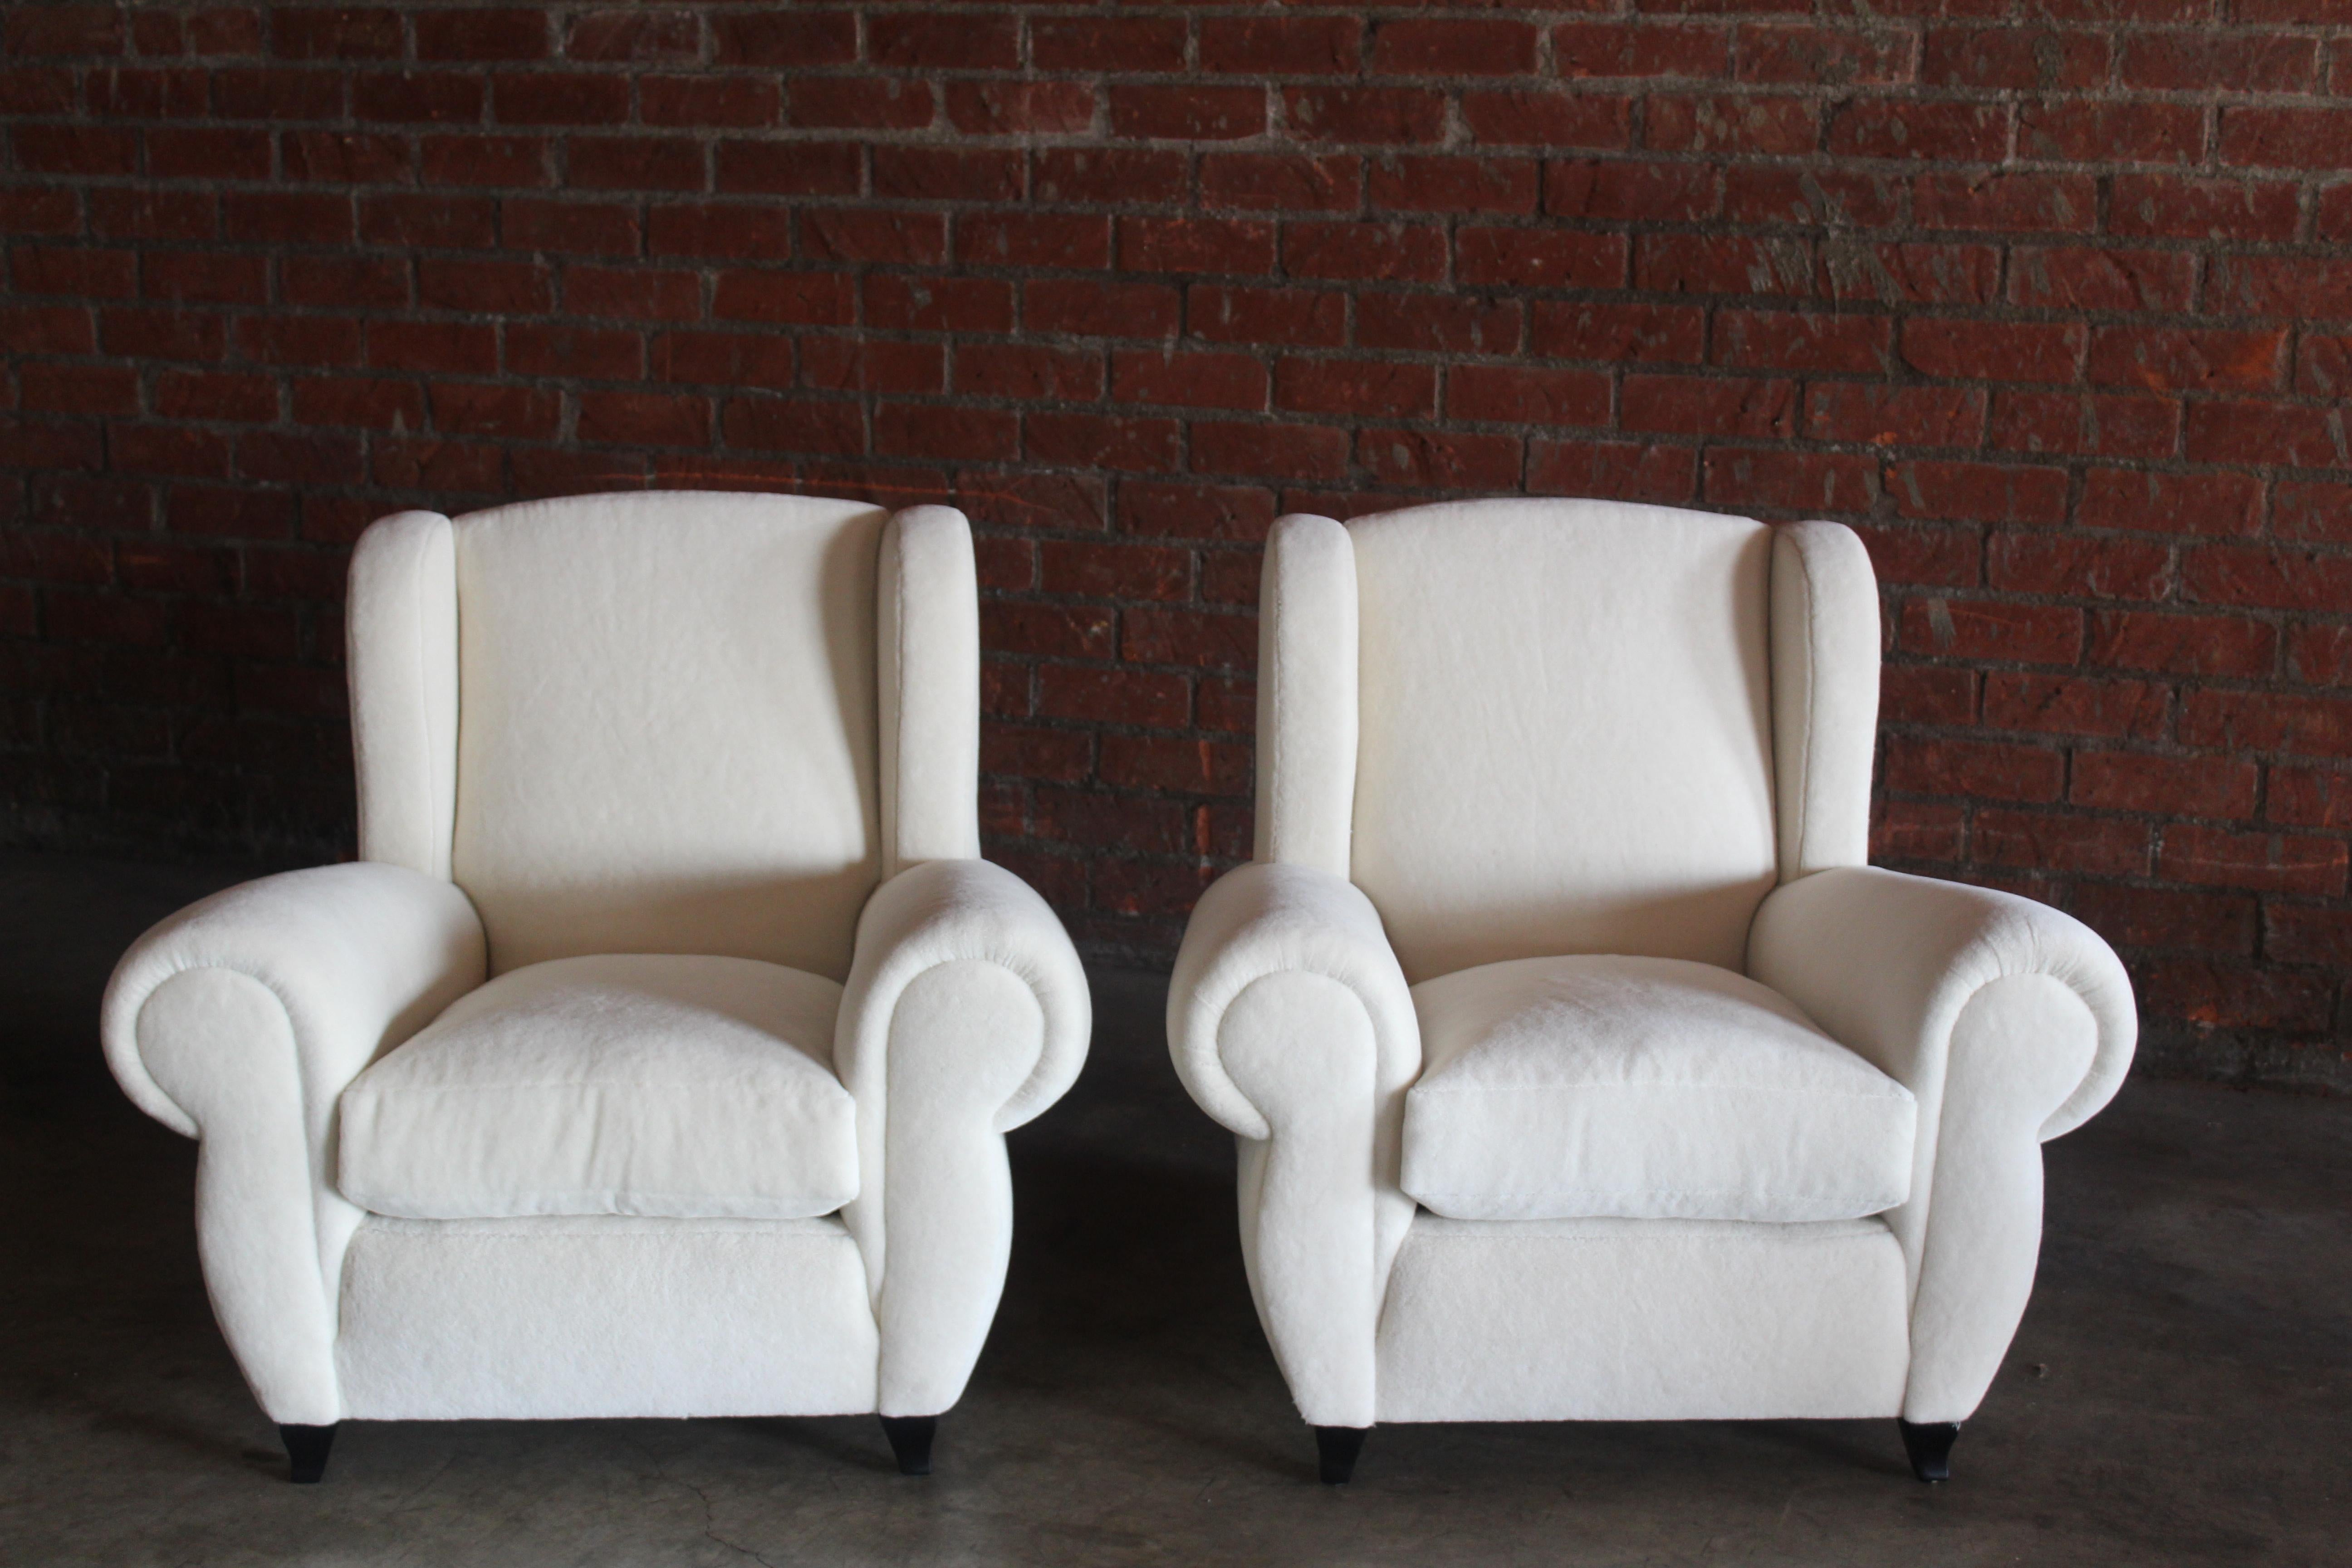 Pair of 1930s Maurice Rinck Style Art Deco French Club Chairs in Alpaca Wool For Sale 1